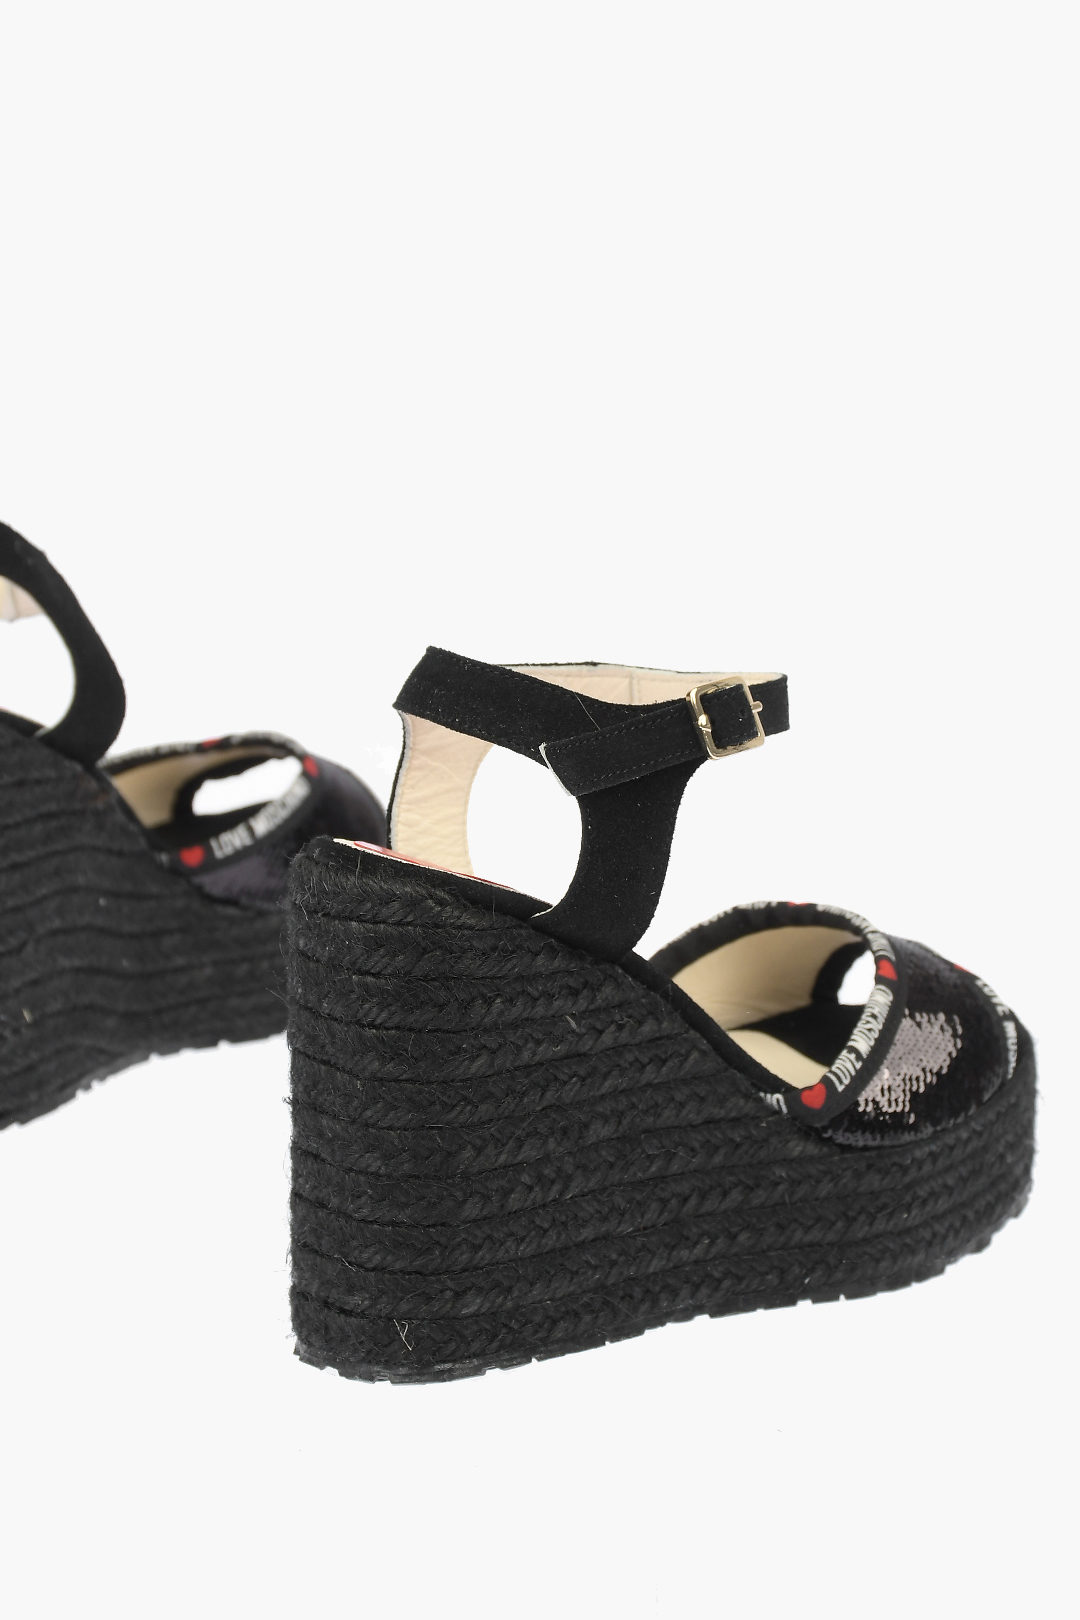 Moschino LOVE Wedge Sandals with Sequins 11cm women - Glamood Outlet